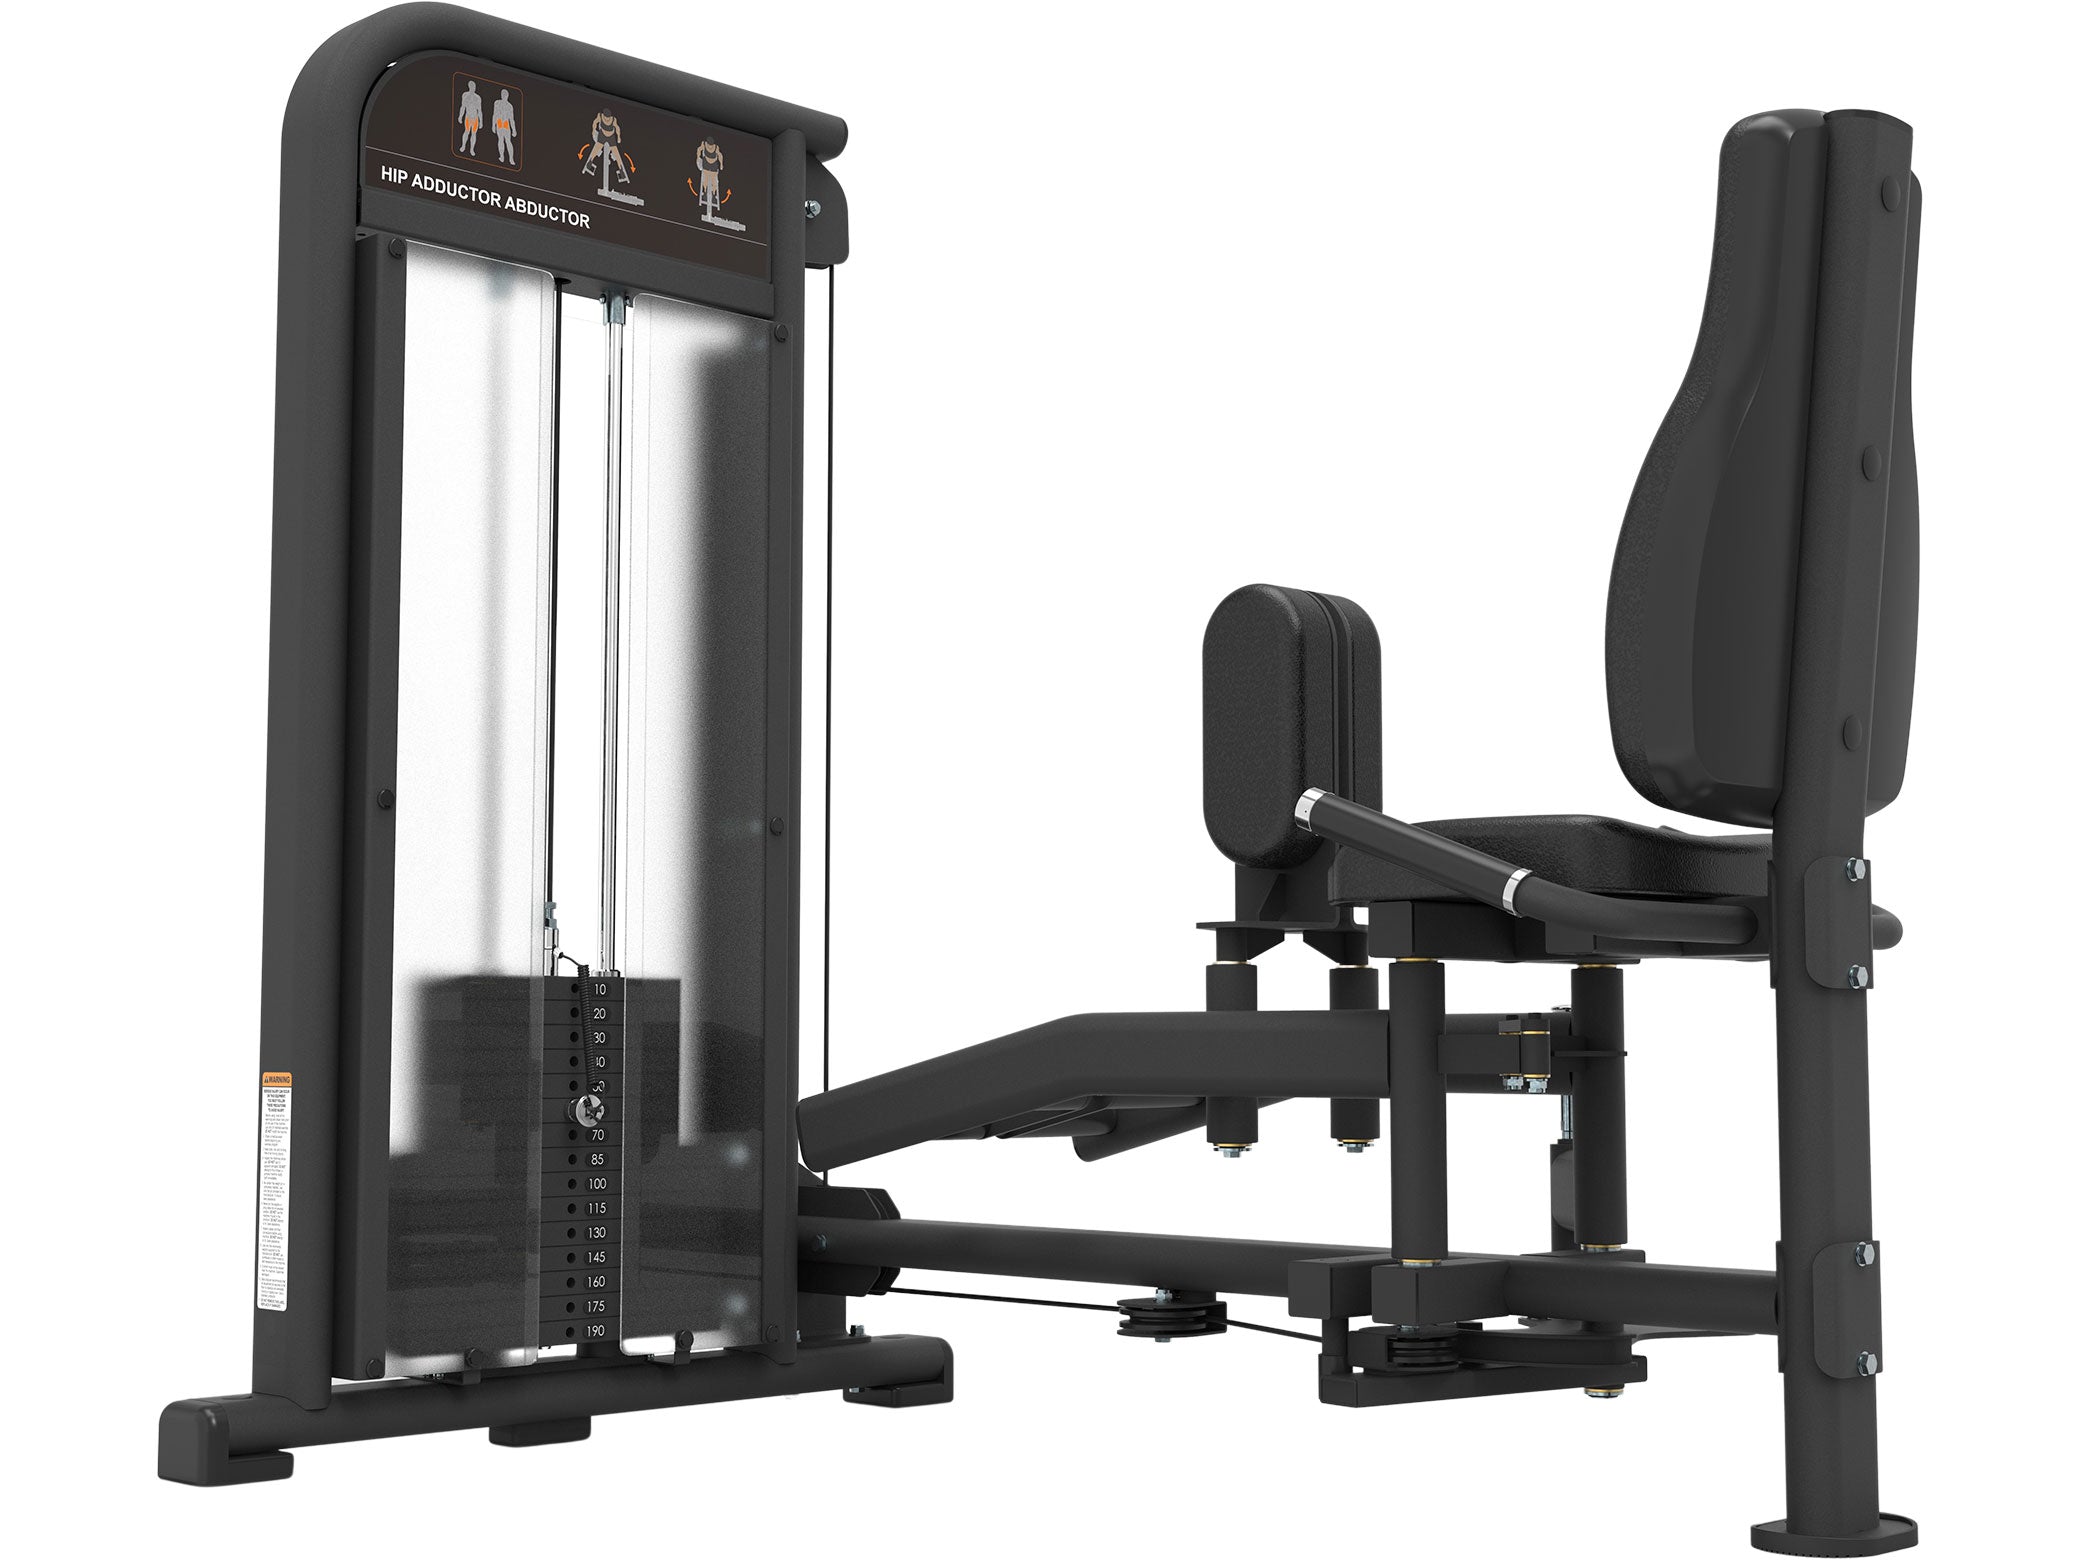 Sportgear Hip Abductor and Adductor Combo